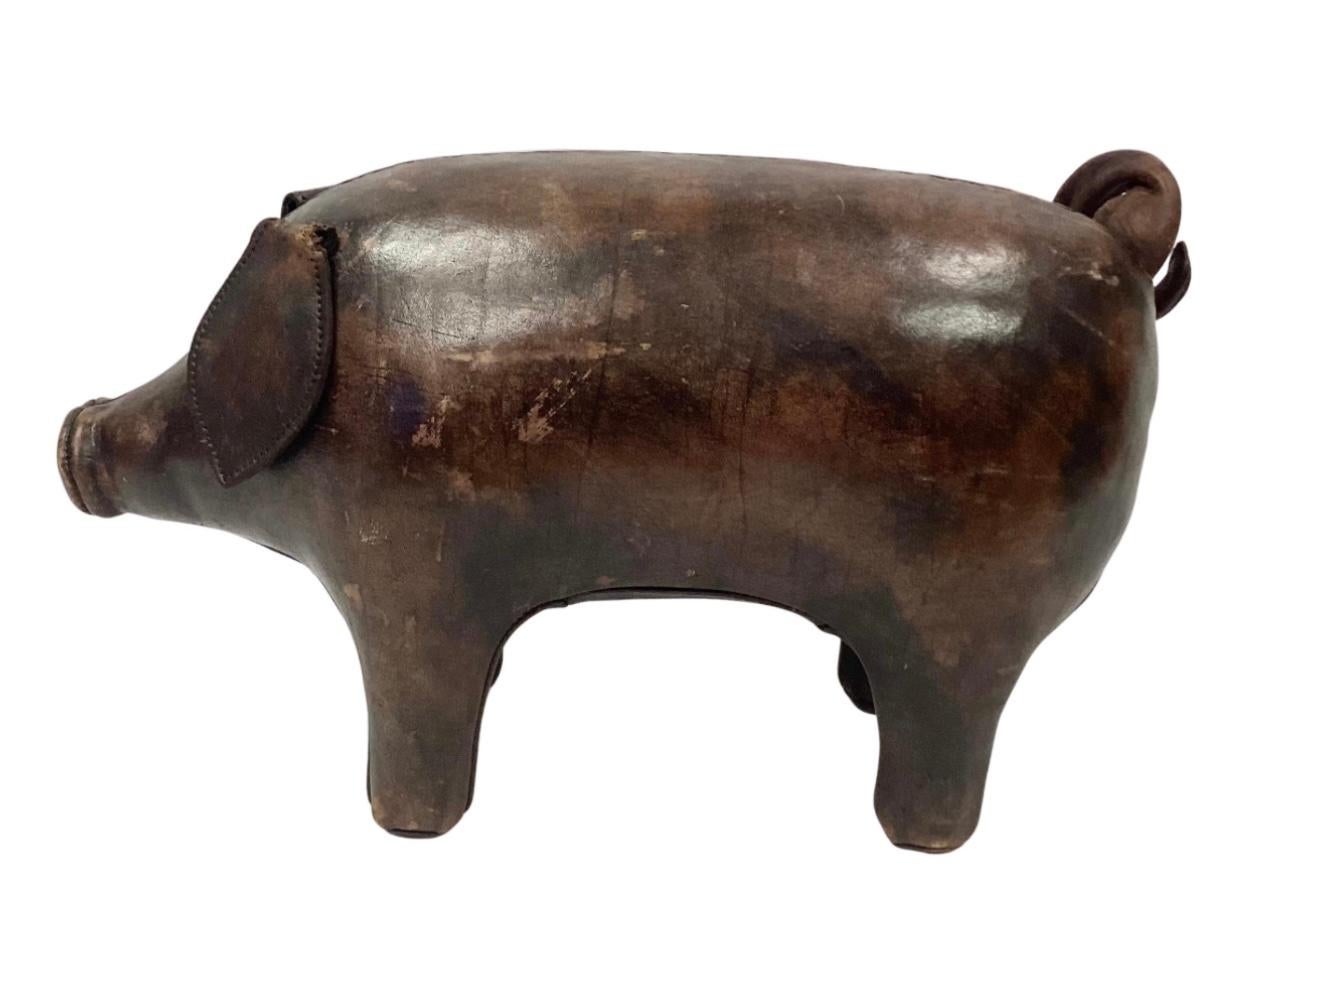 Vintage brown leather upholstered pig crafted by Omersa & Co. (Lincolnshire, UK), probably for Abercrombie & Fitch, with rolled leather eyes, snout, and metal capped feet. Wonderful rich patina.